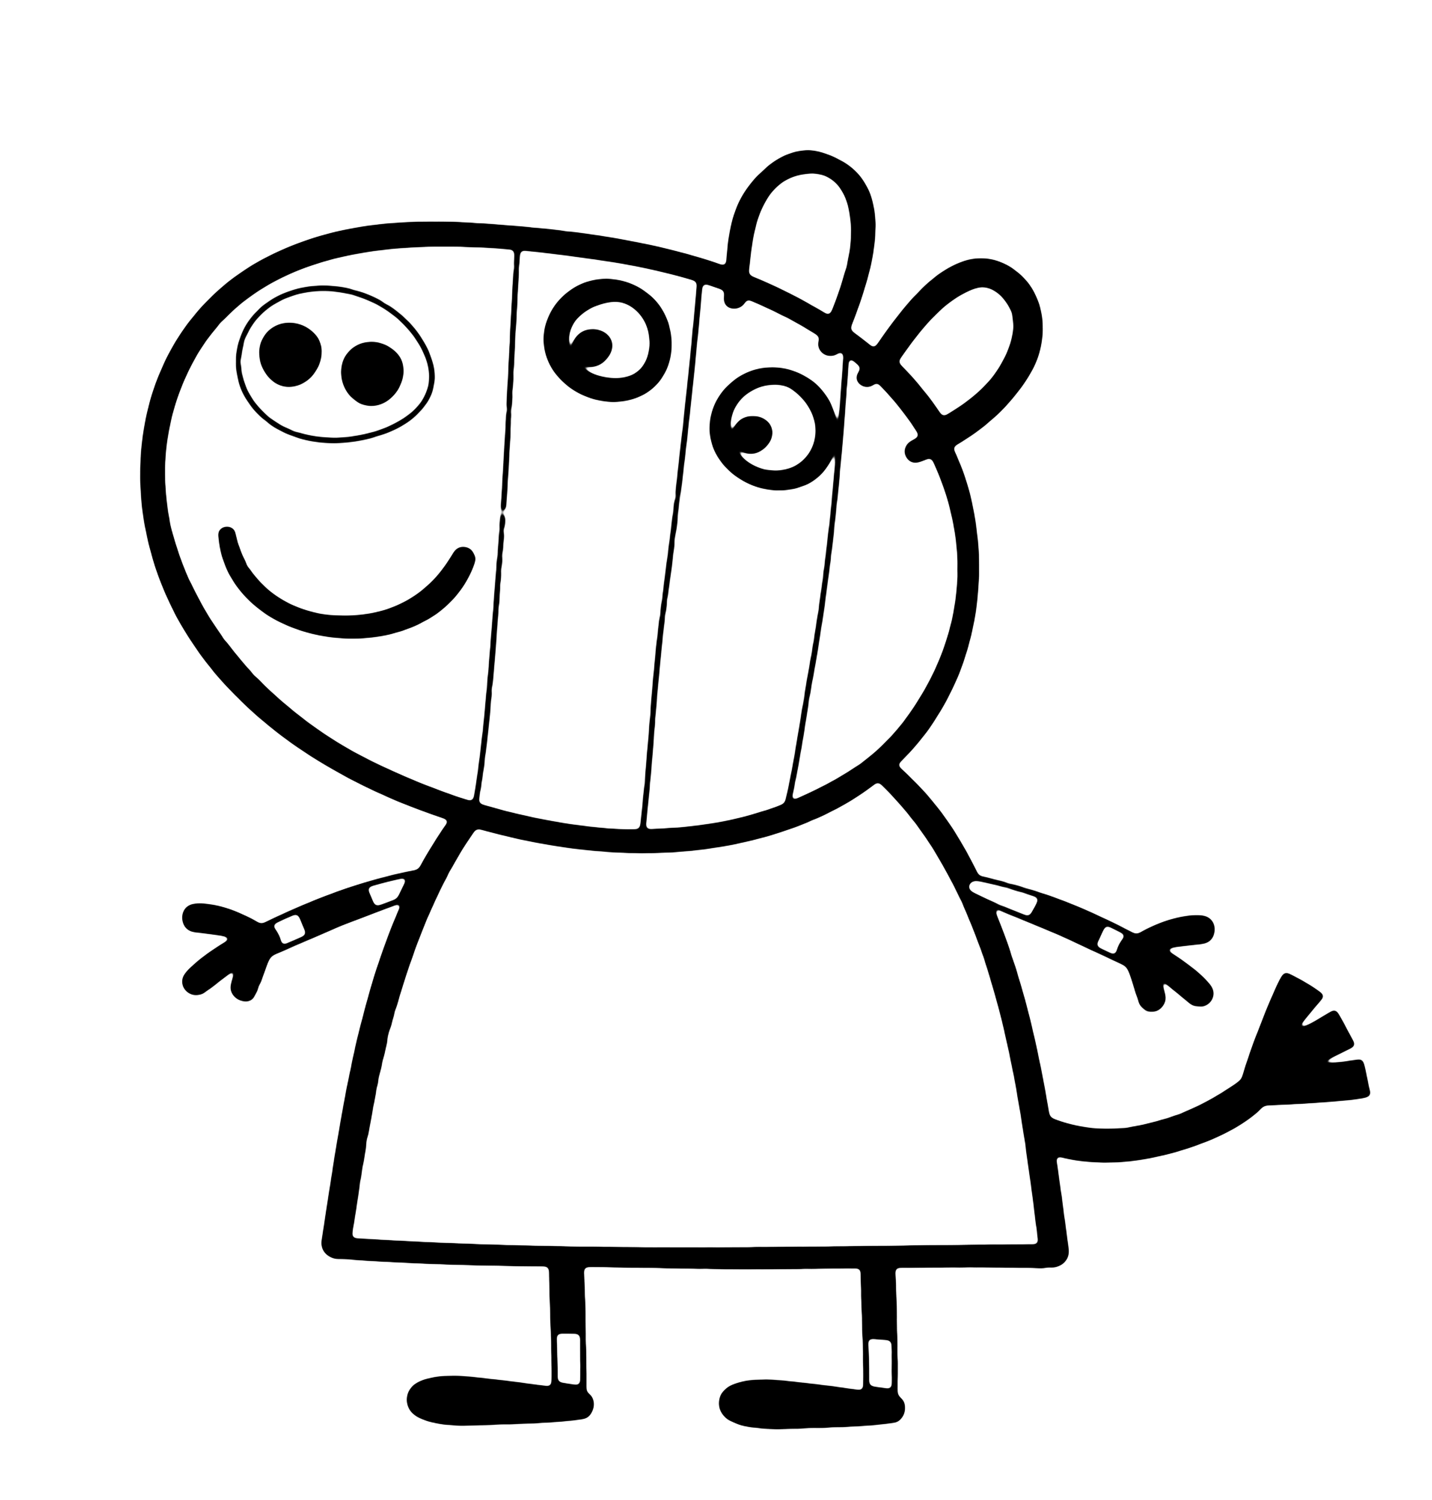 Peppa Pig And Friends Coloring Pages Print - Coloring Home